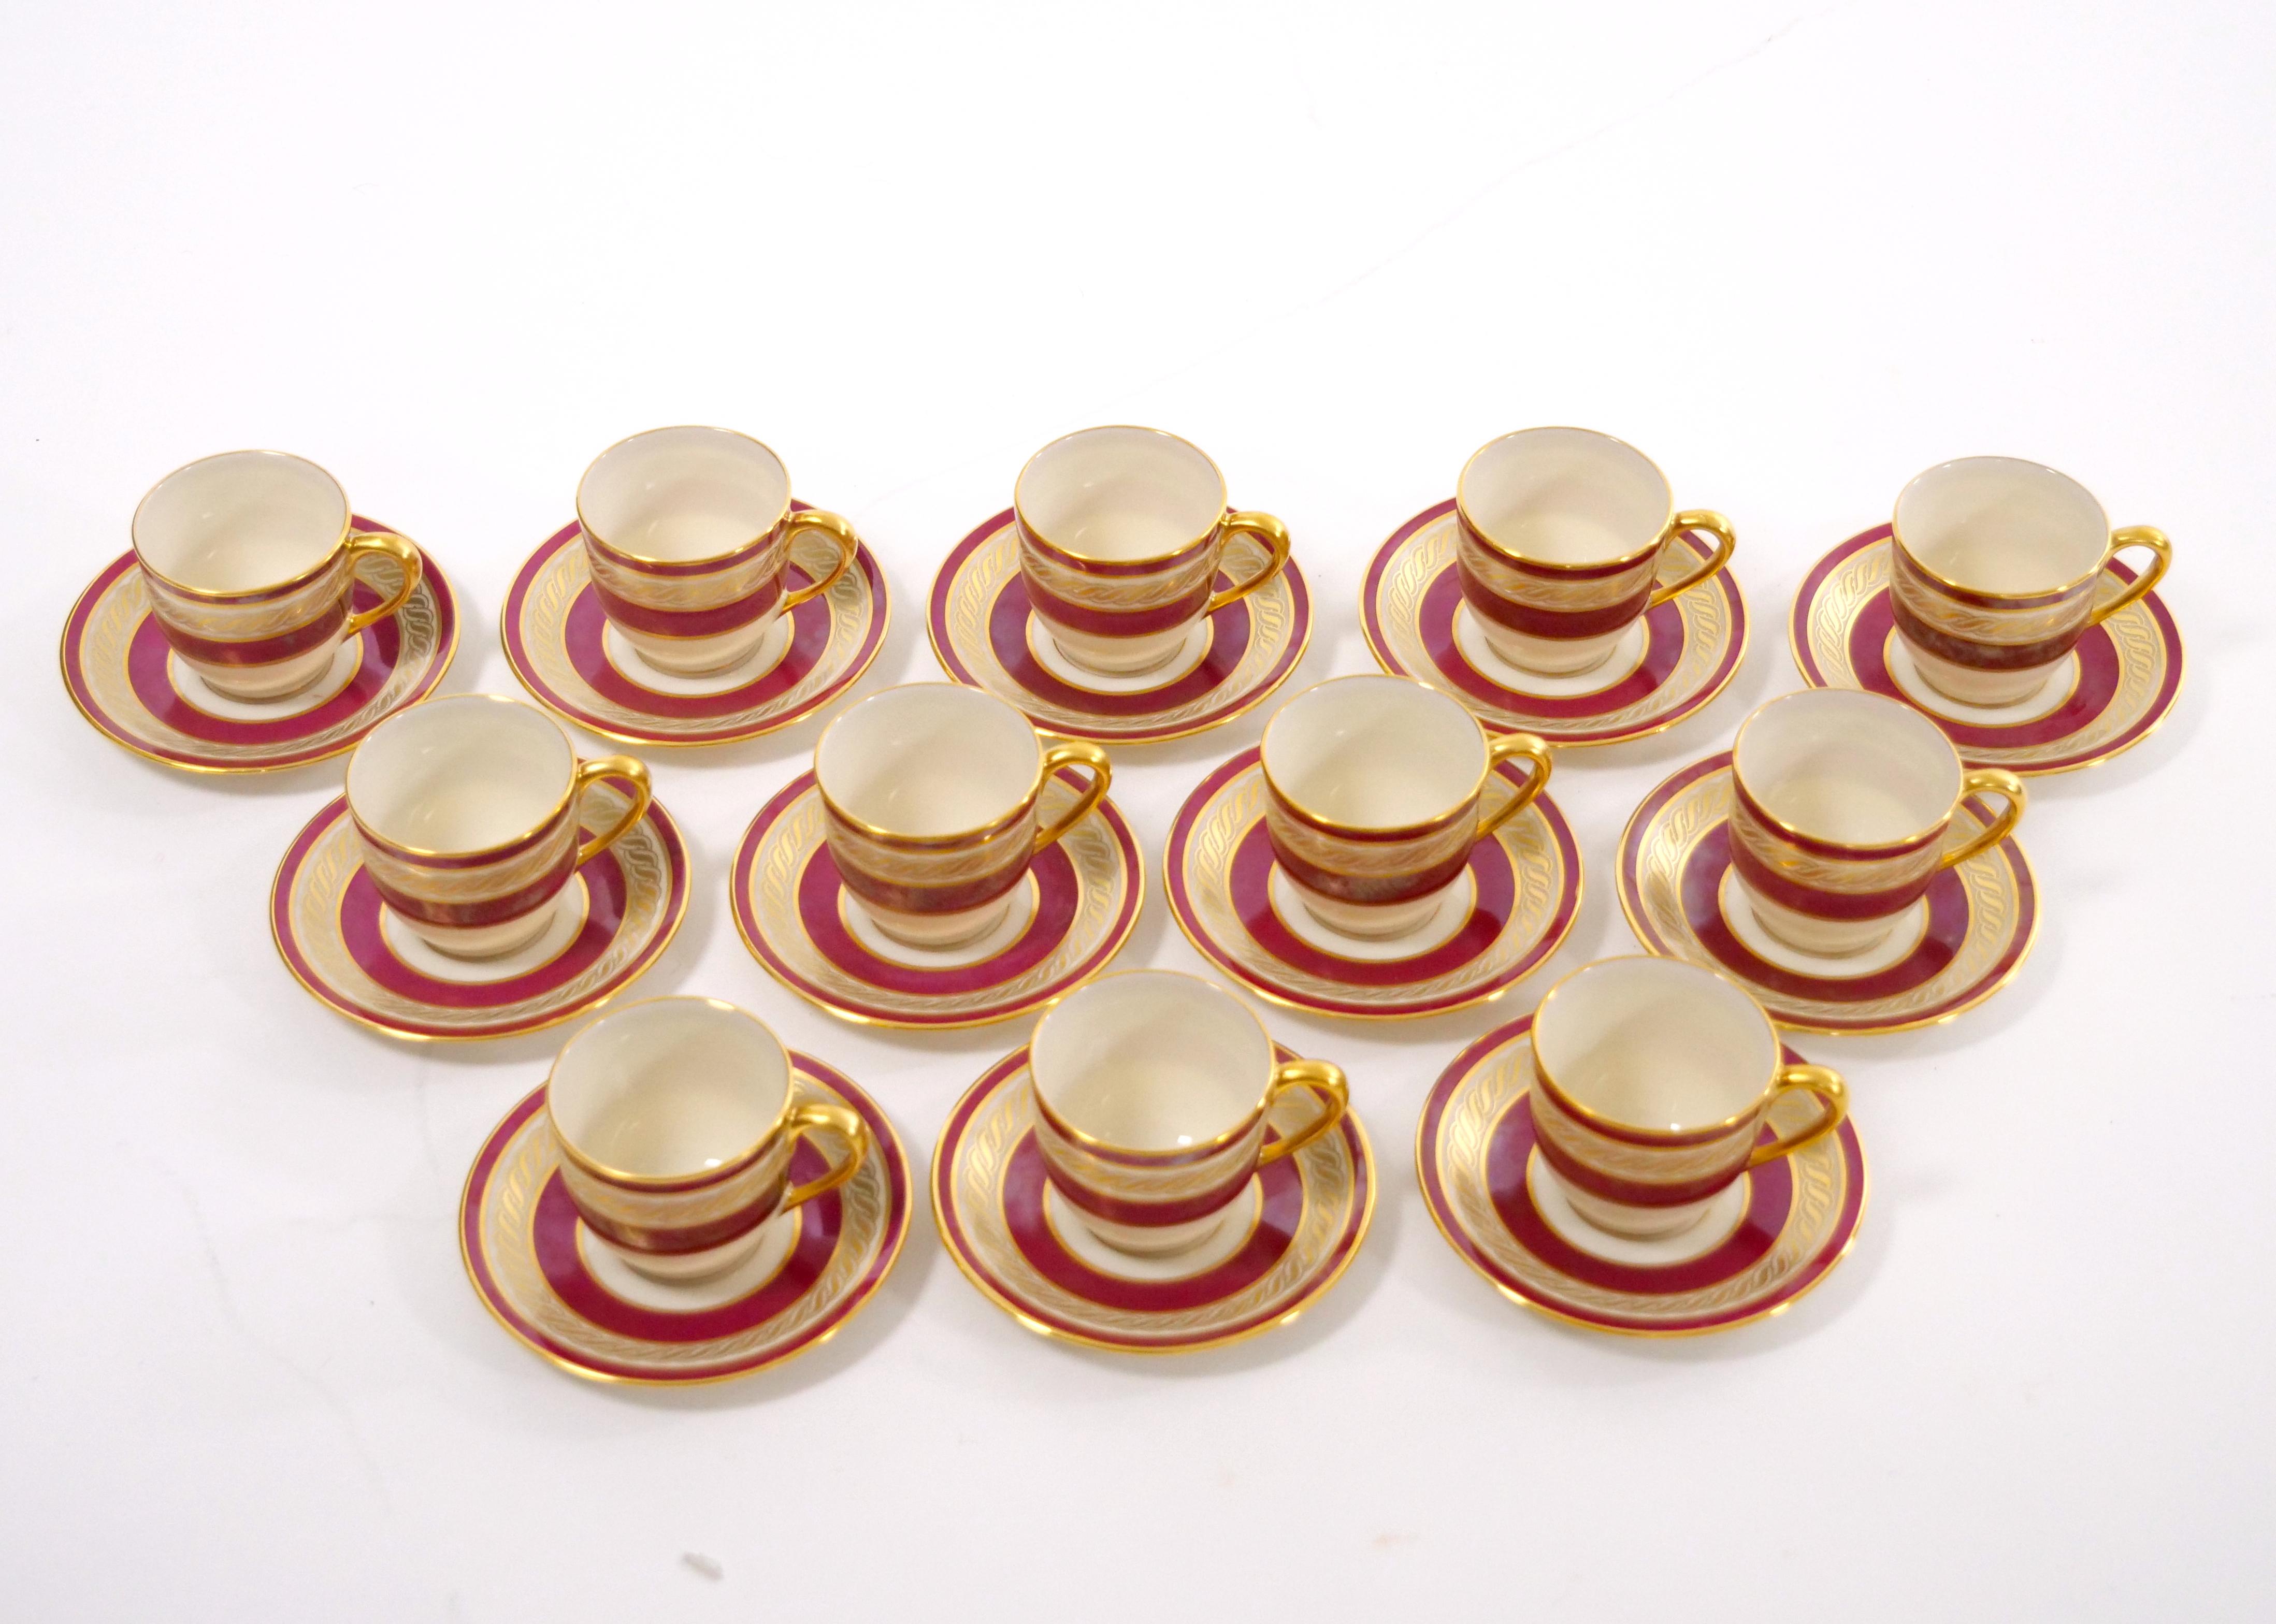 American Porcelain/Gilt Braid Decorated By Lenox for J.E Caldwell Dinner Set For Sale 3